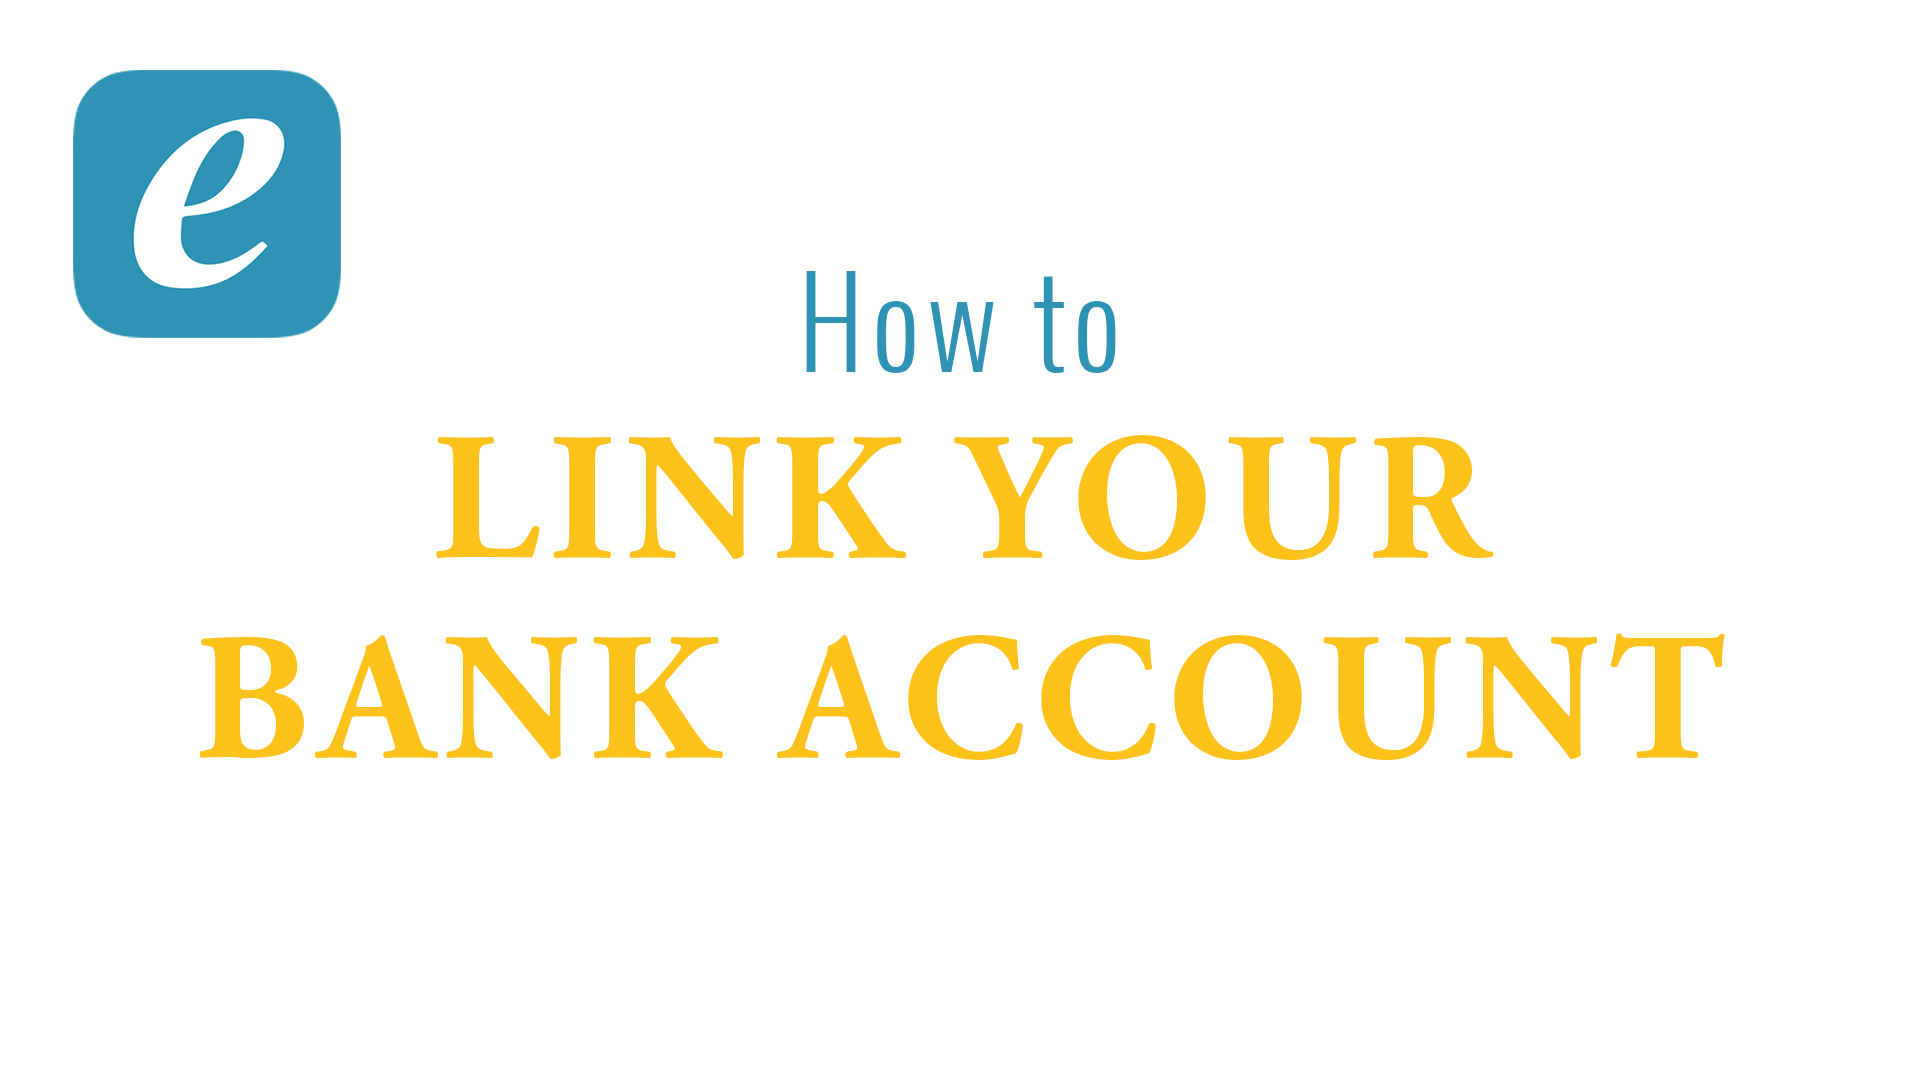 Link Your Bank Account